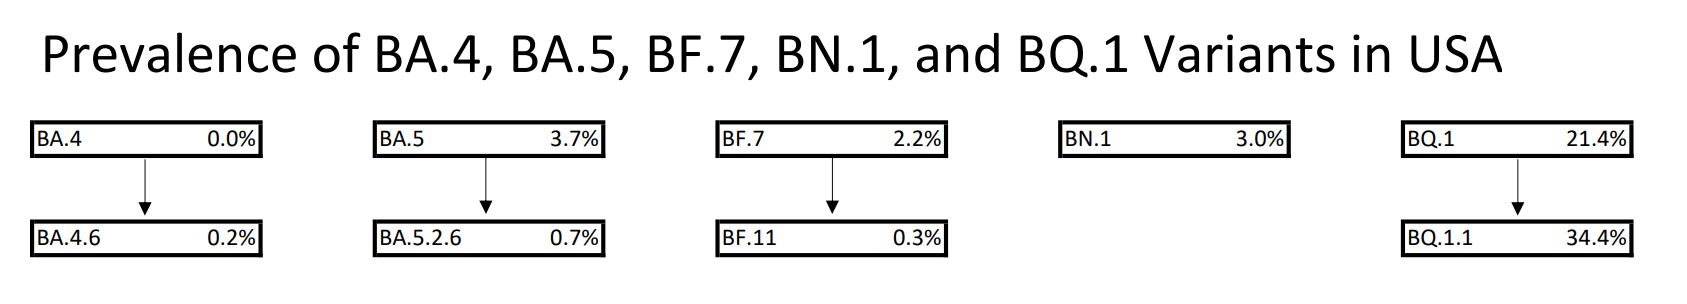 chart showing prevalence of BA.4, BA.5, BF.7, BN.1, and BQ variants in USA